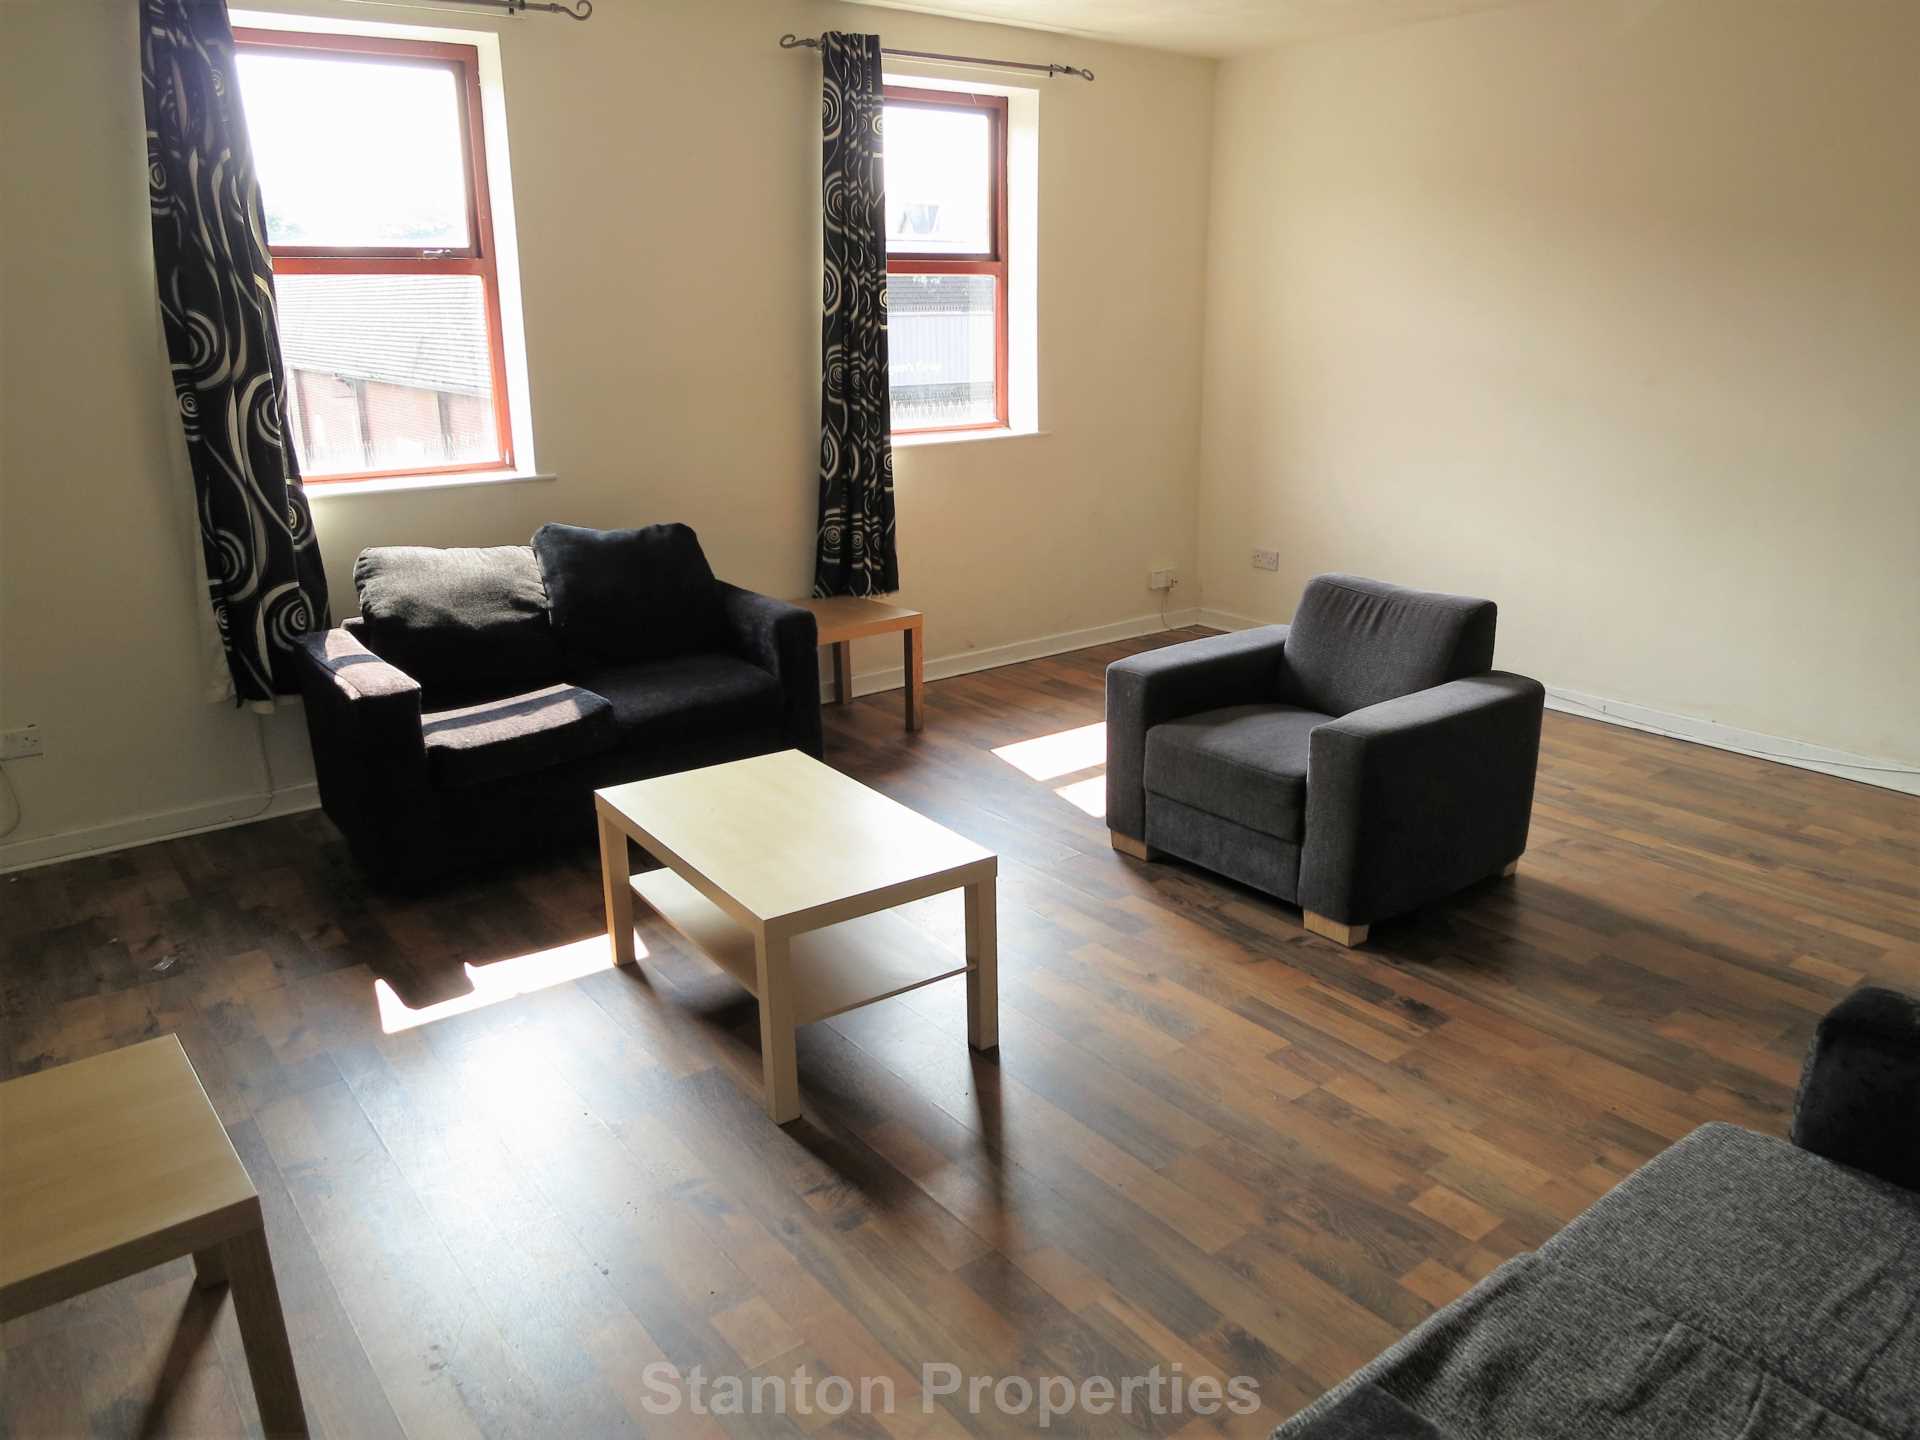 See Video Tour, £120 pppw, Copson Street, Withington, Image 3